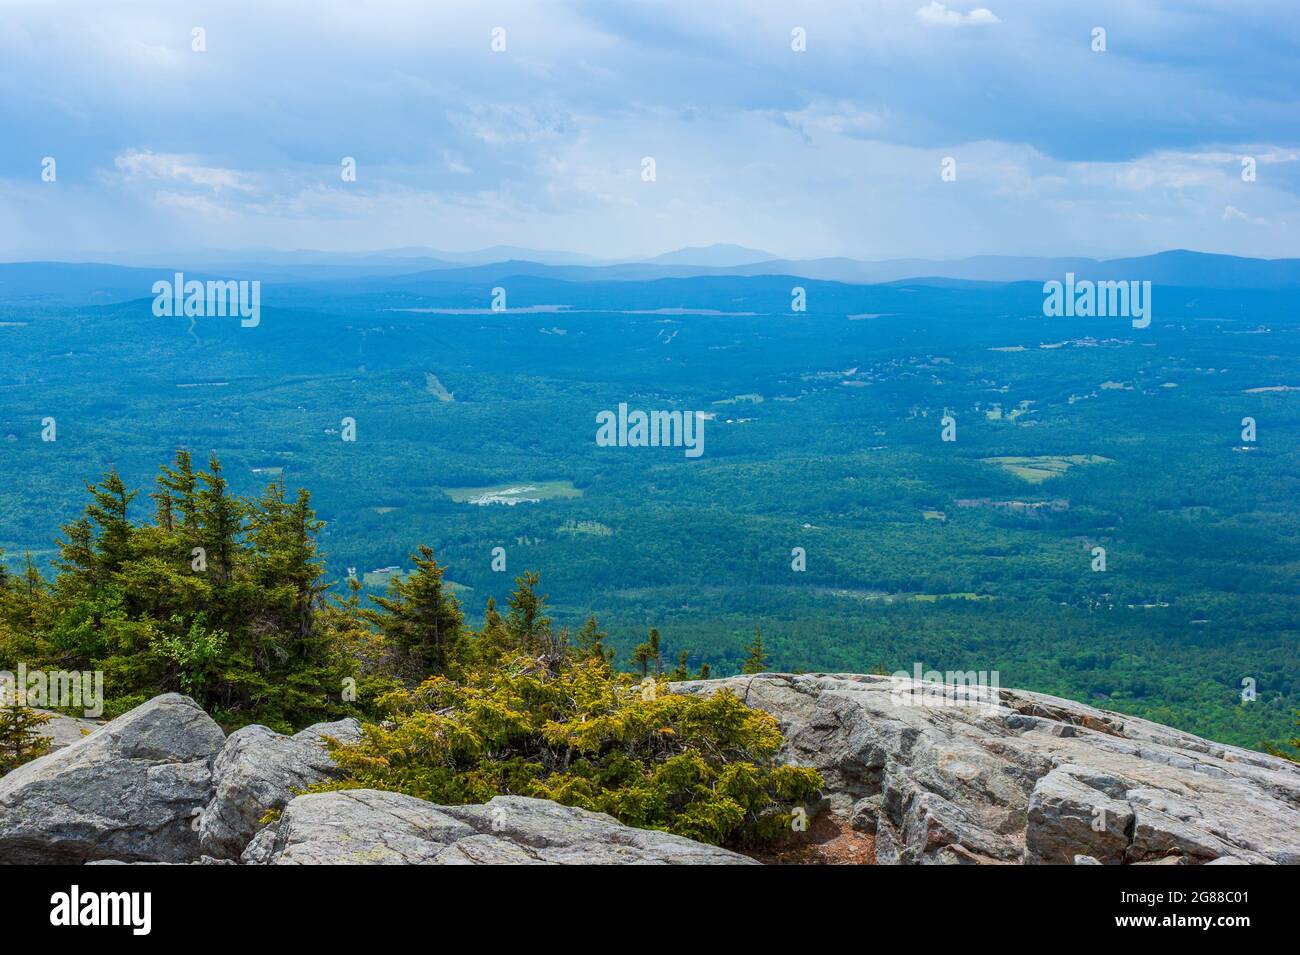 Western view from Mt. Kearsarge summit towards Lake Sunapee and Mt. Ascutney. Rocky granite outcrop and stunted spruce trees. Distant peaks and ridges Stock Photo